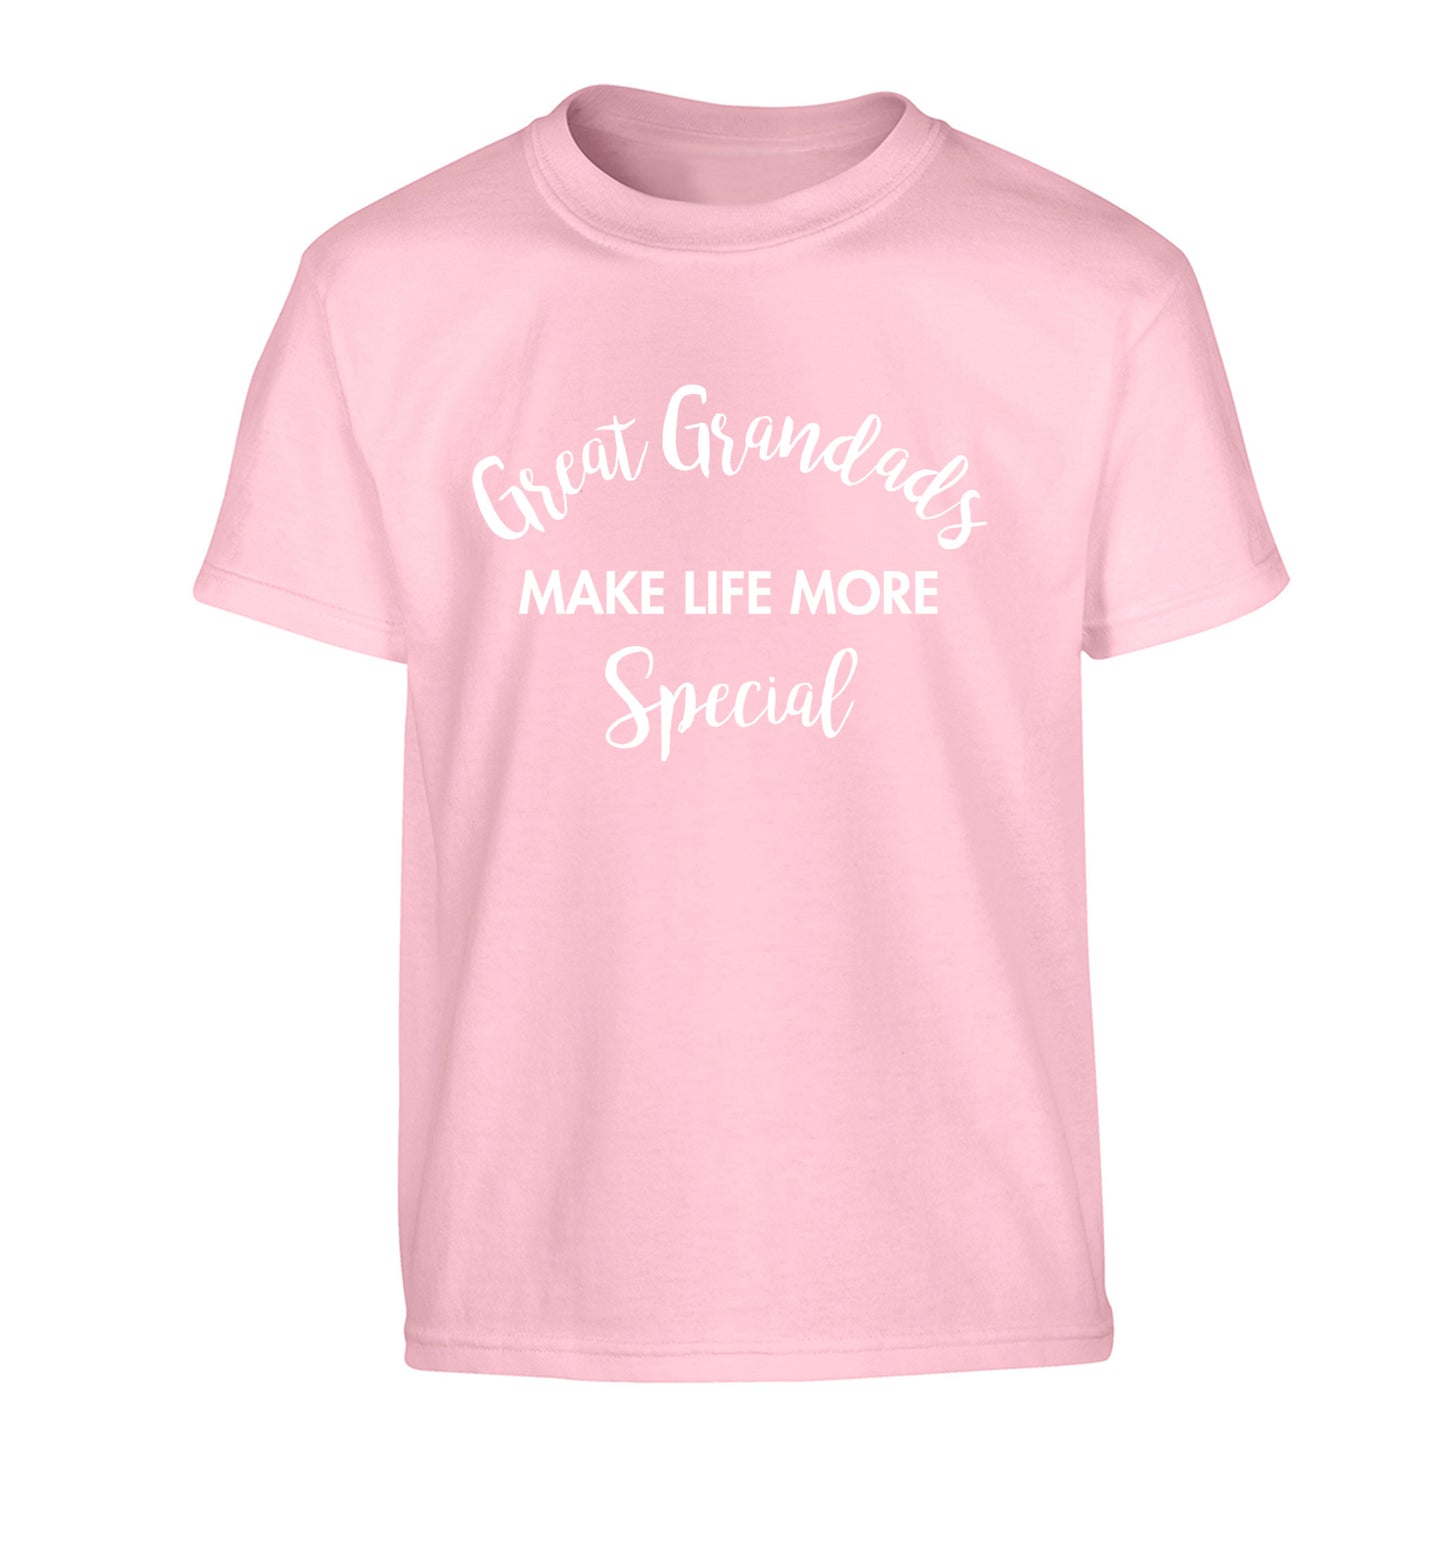 Great Grandads make life more special Children's light pink Tshirt 12-14 Years